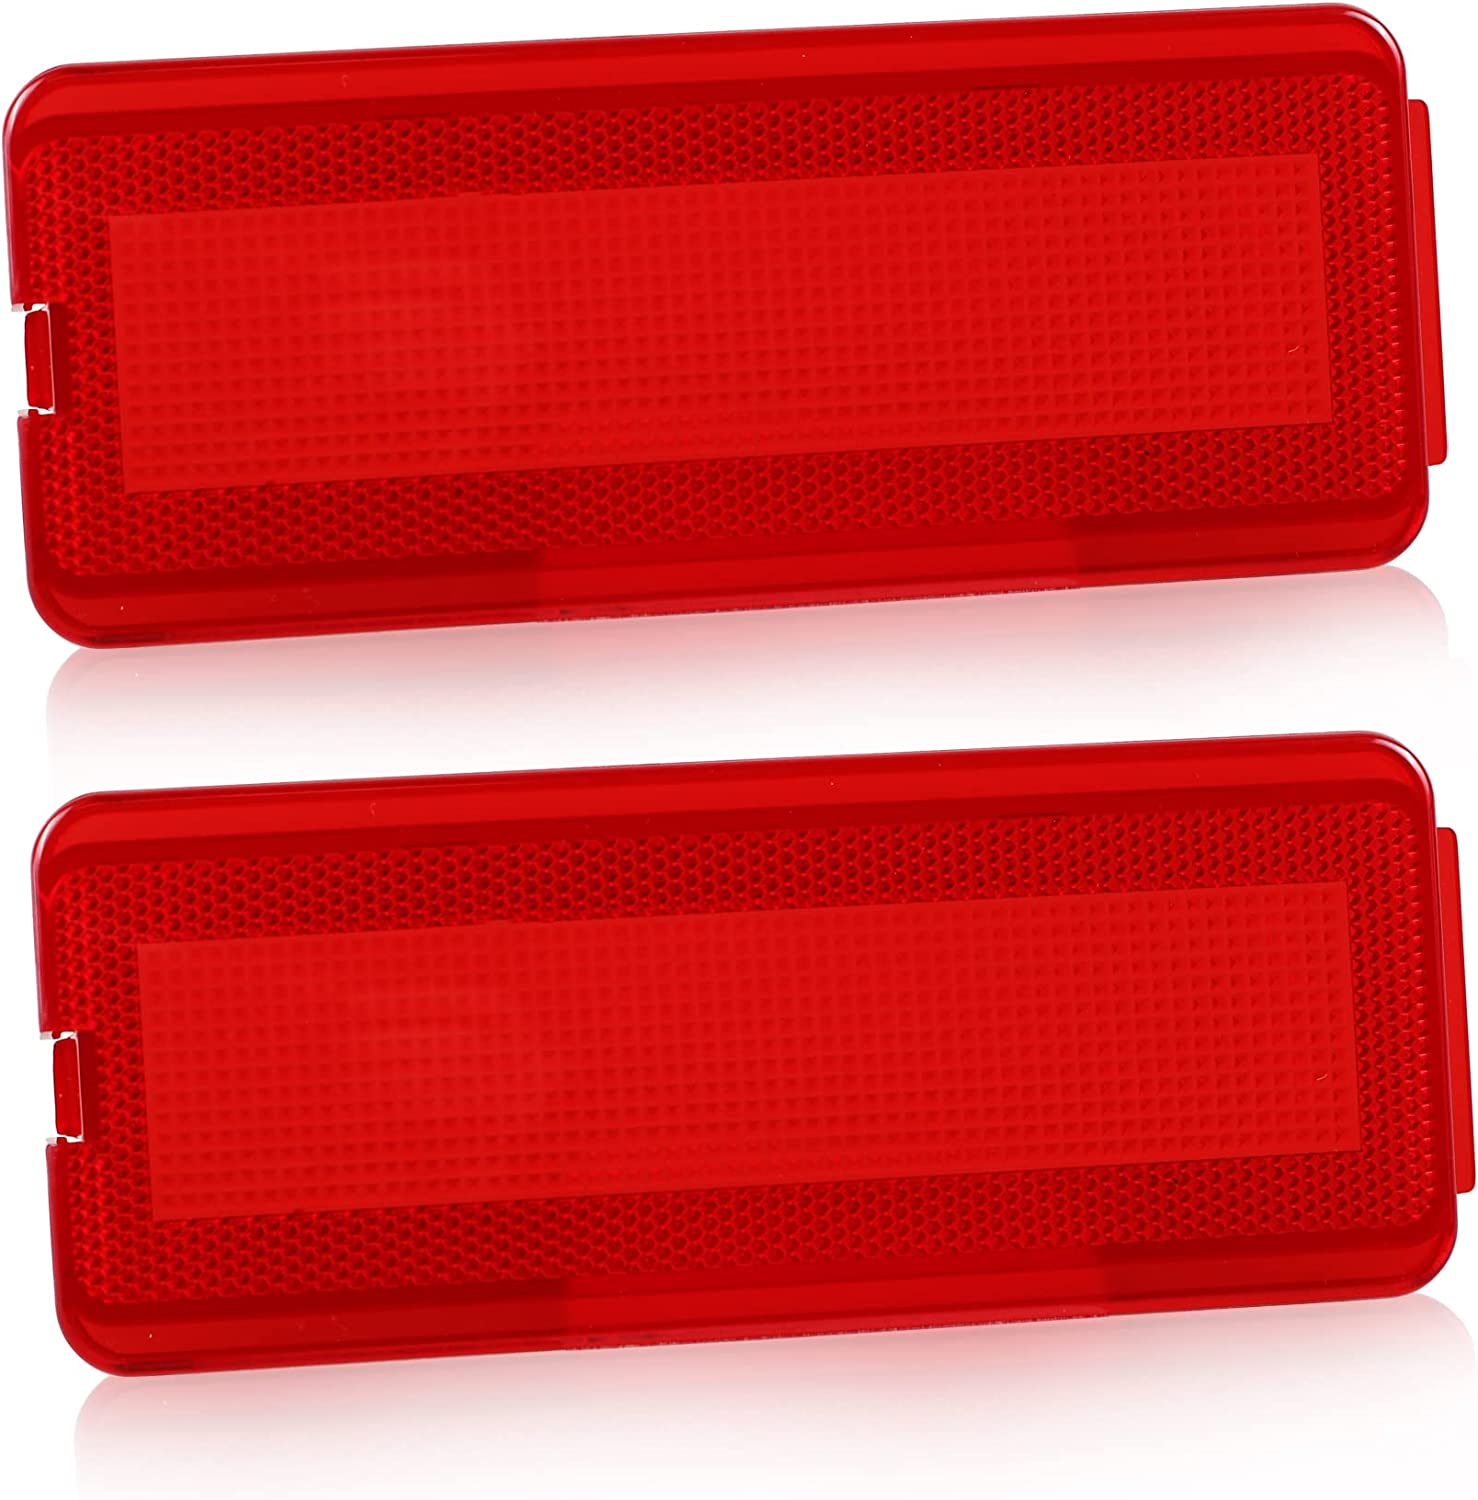 HERCOO Interior Door Reflectors Red Front & Rear Reflector Light Cover Compatible with Ford Excursion 2000 to 2005, F250 F350 F450 F550 Super Duty 1999 to 2007, Pack of 2